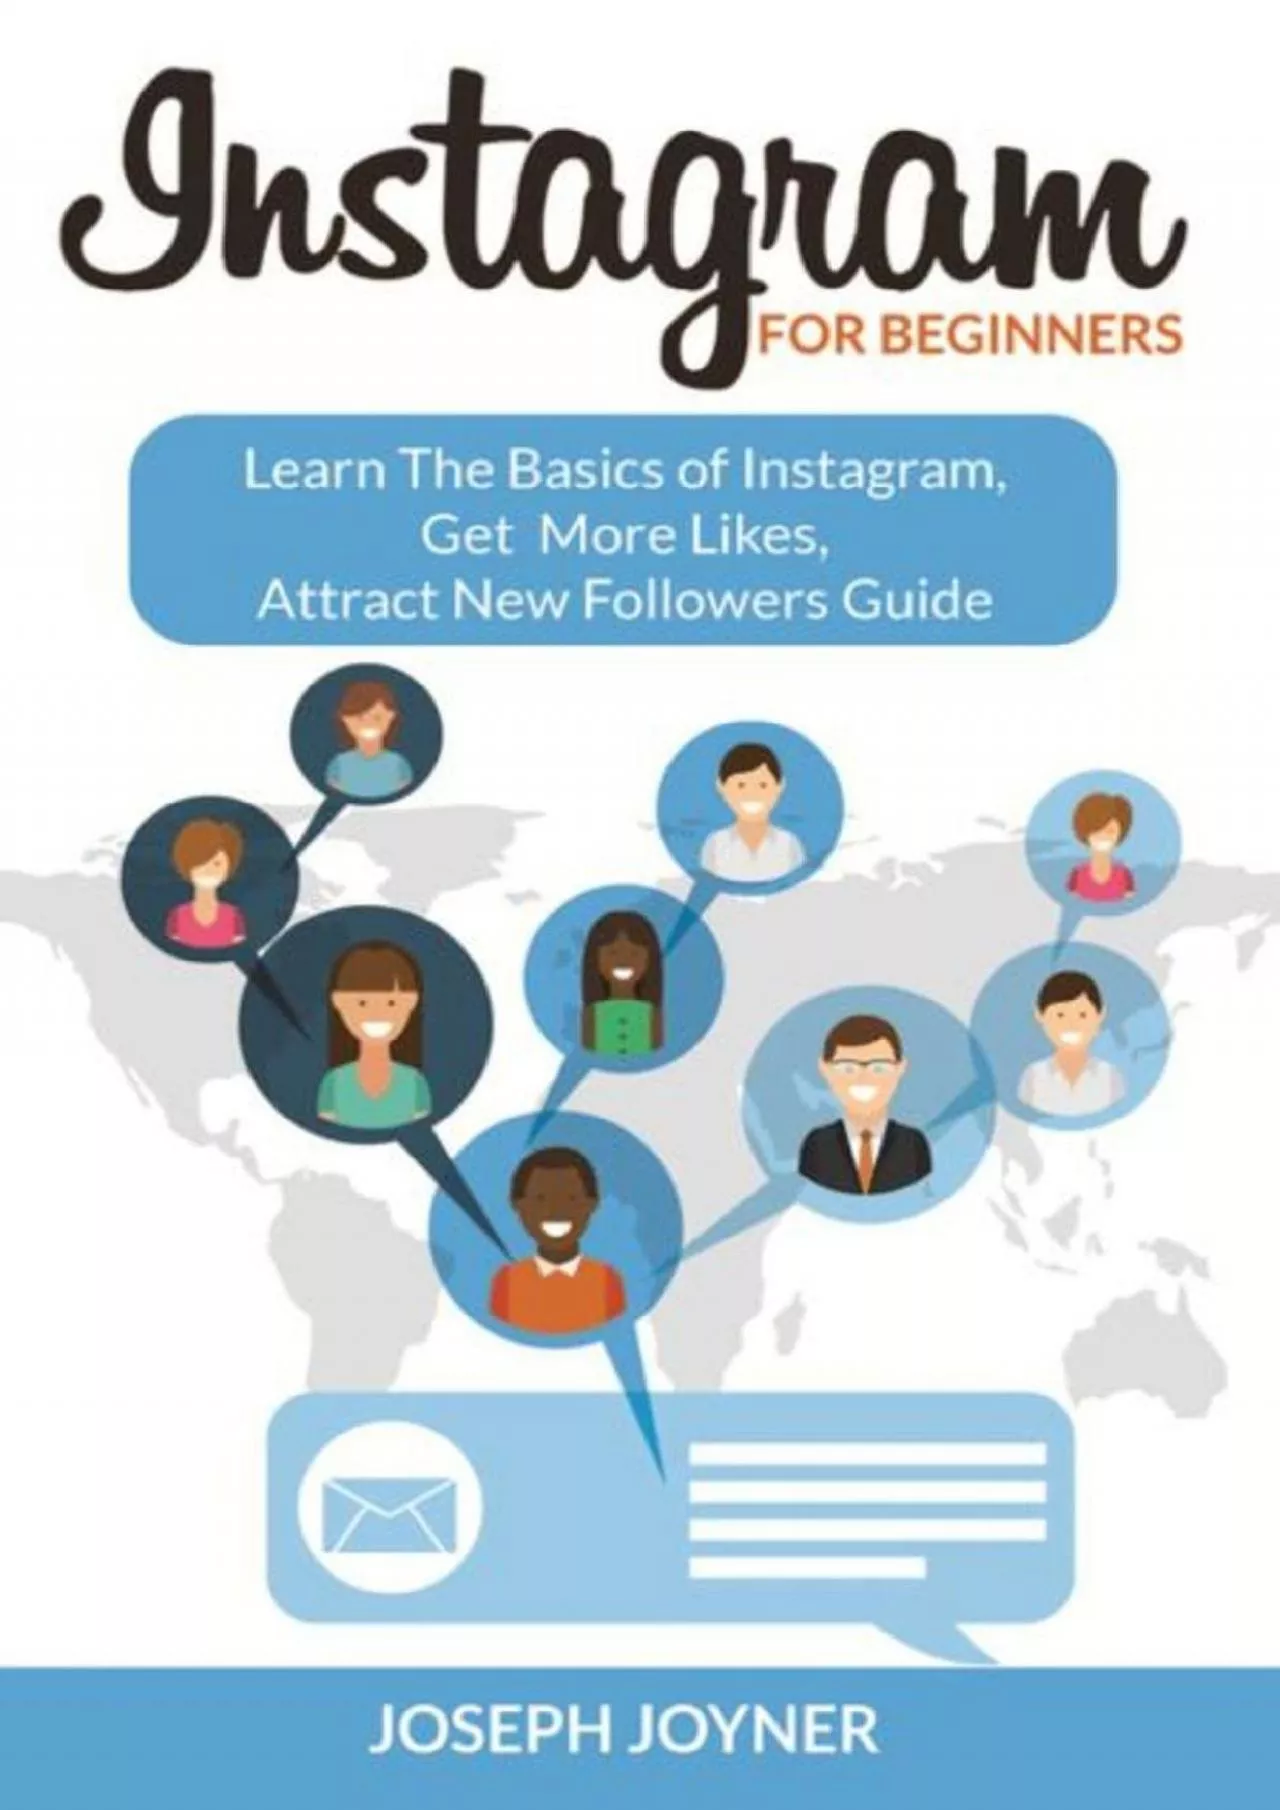 Instagram For Beginners: Learn The Basics of Instagram, Get More Likes, Attract New Followers